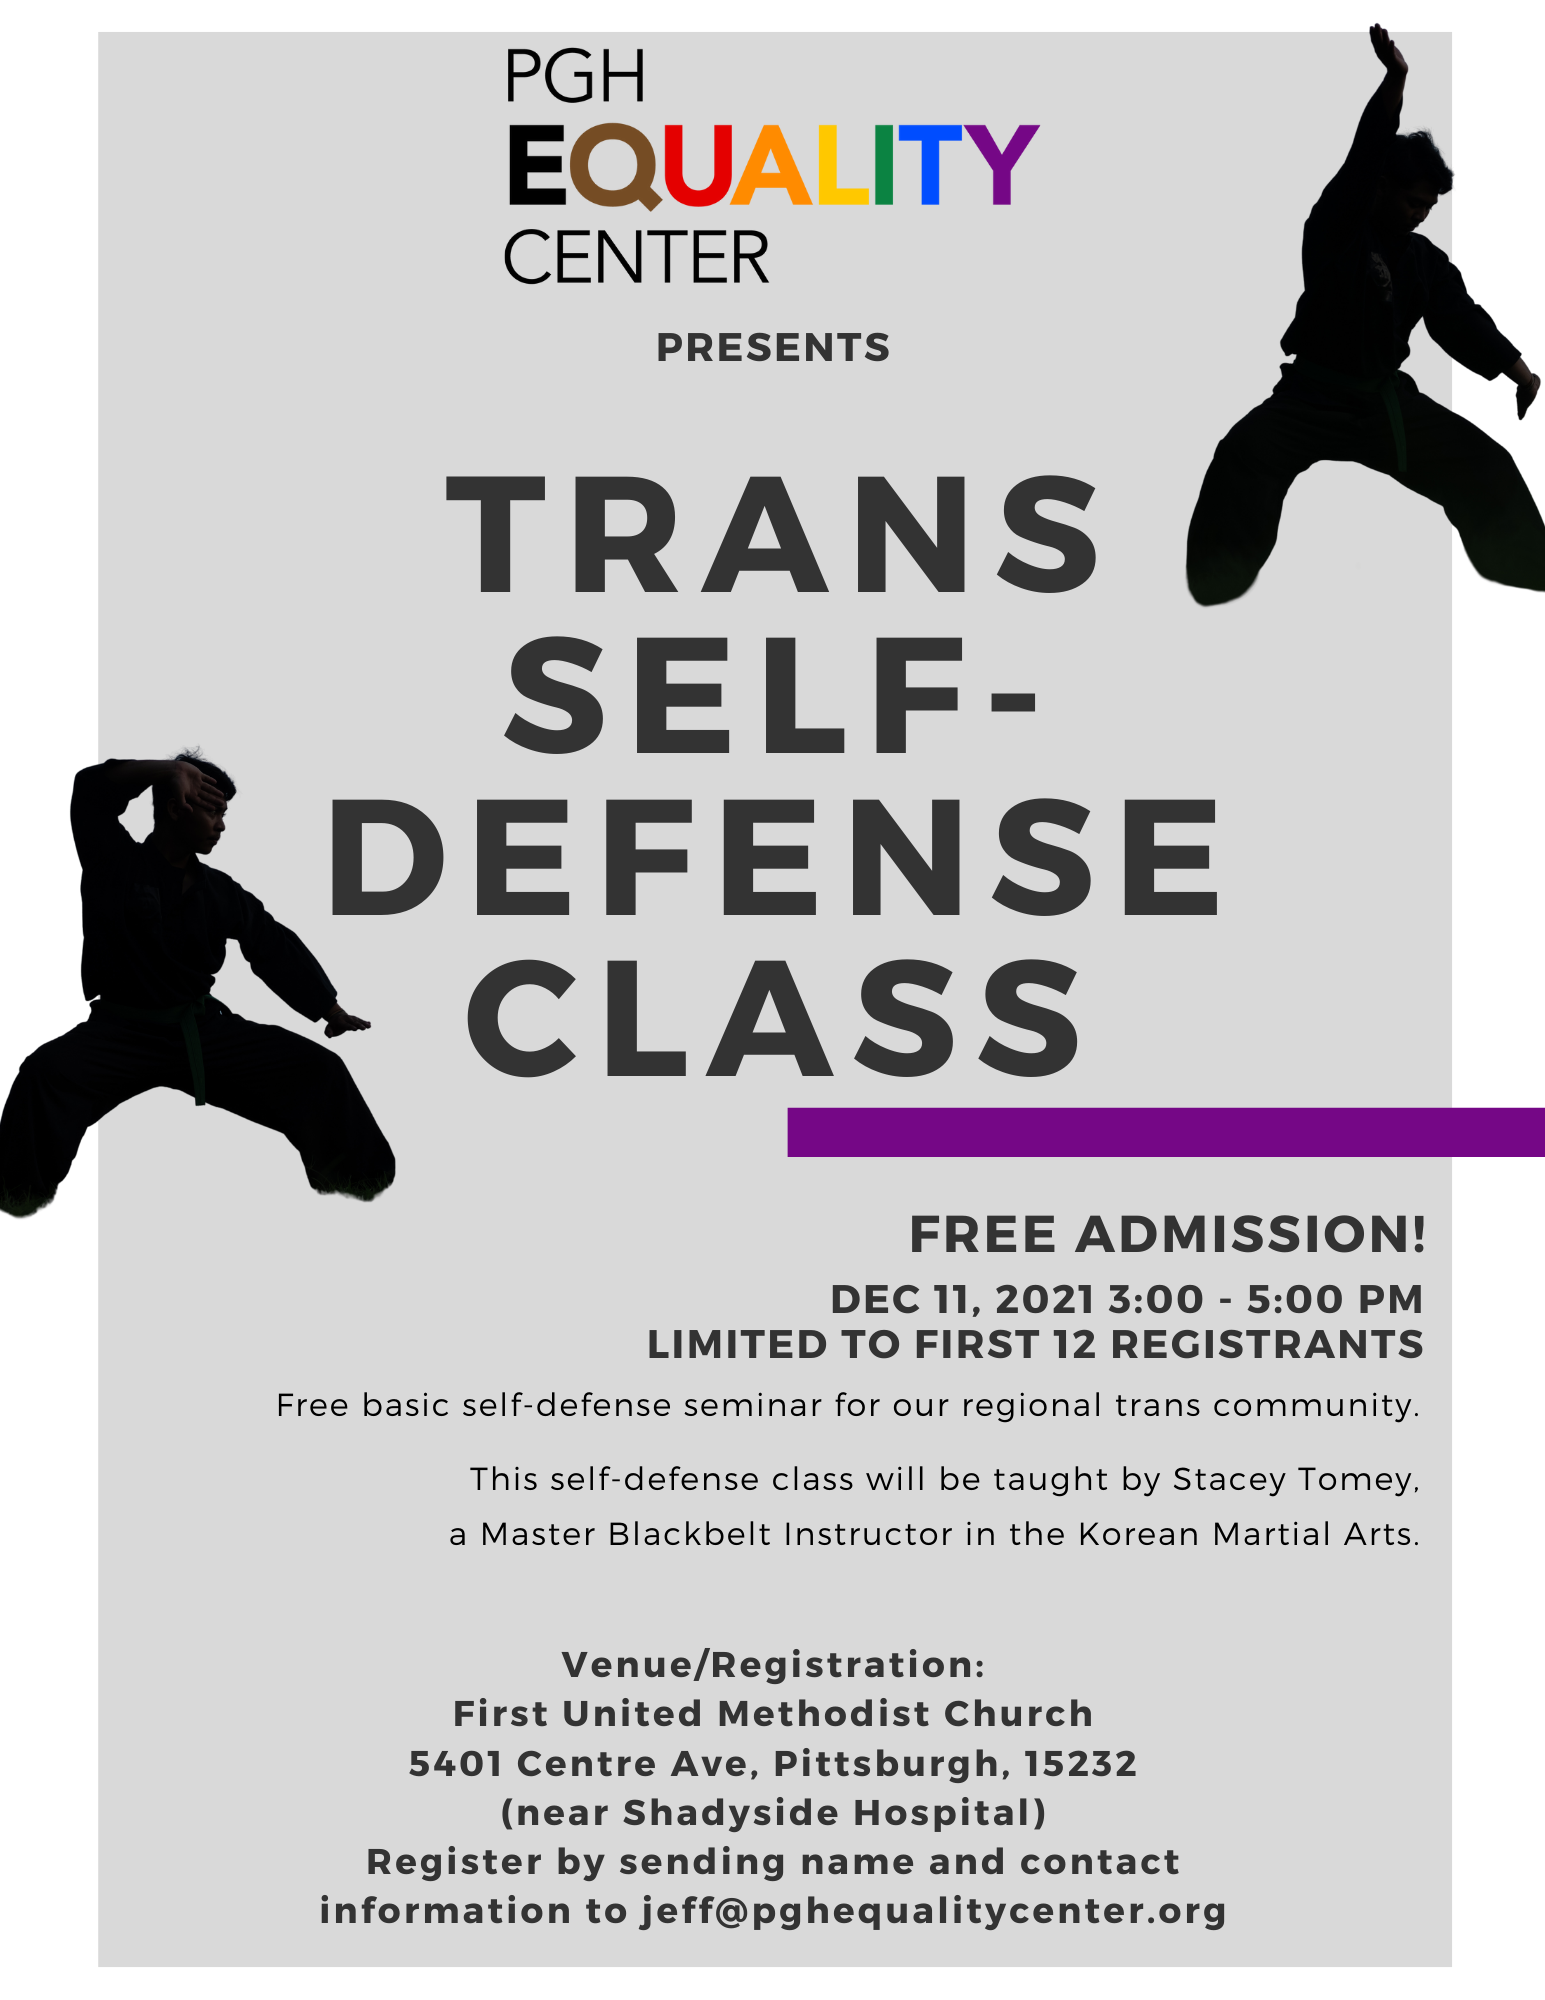 Trans Self-Defense Class in Pittsburgh